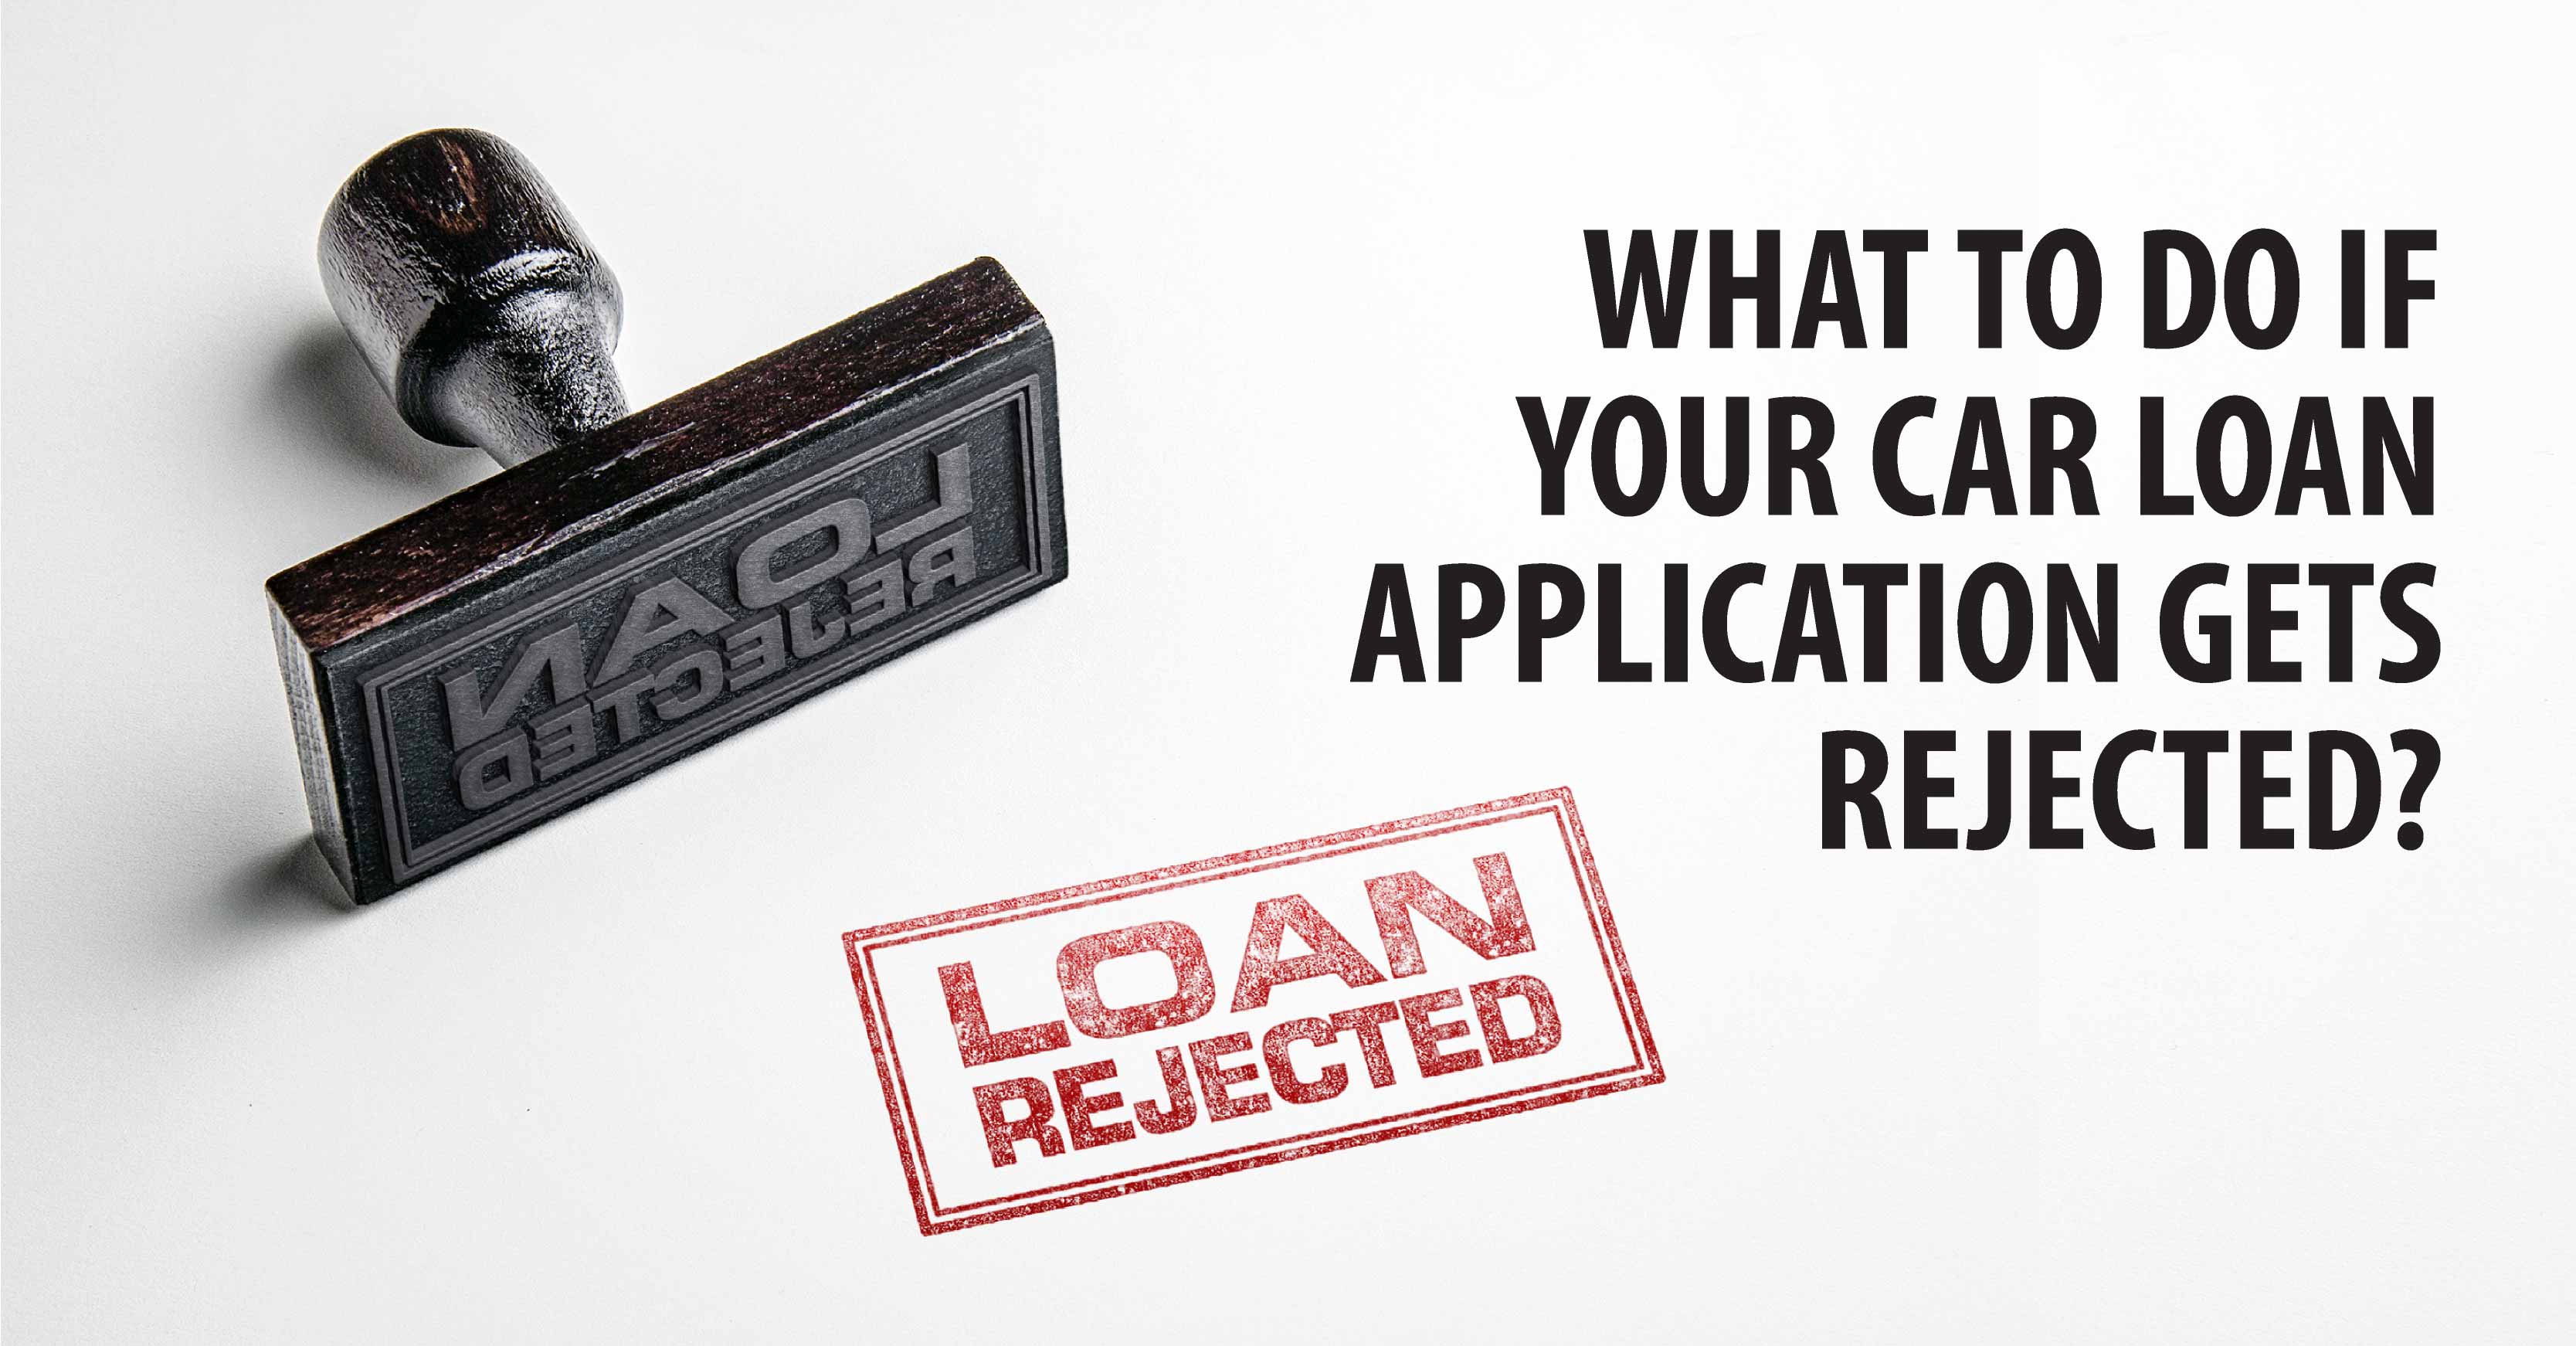 WHAT TO DO IF YOUR CAR LOAN APPLICATION GETS REJECTED?